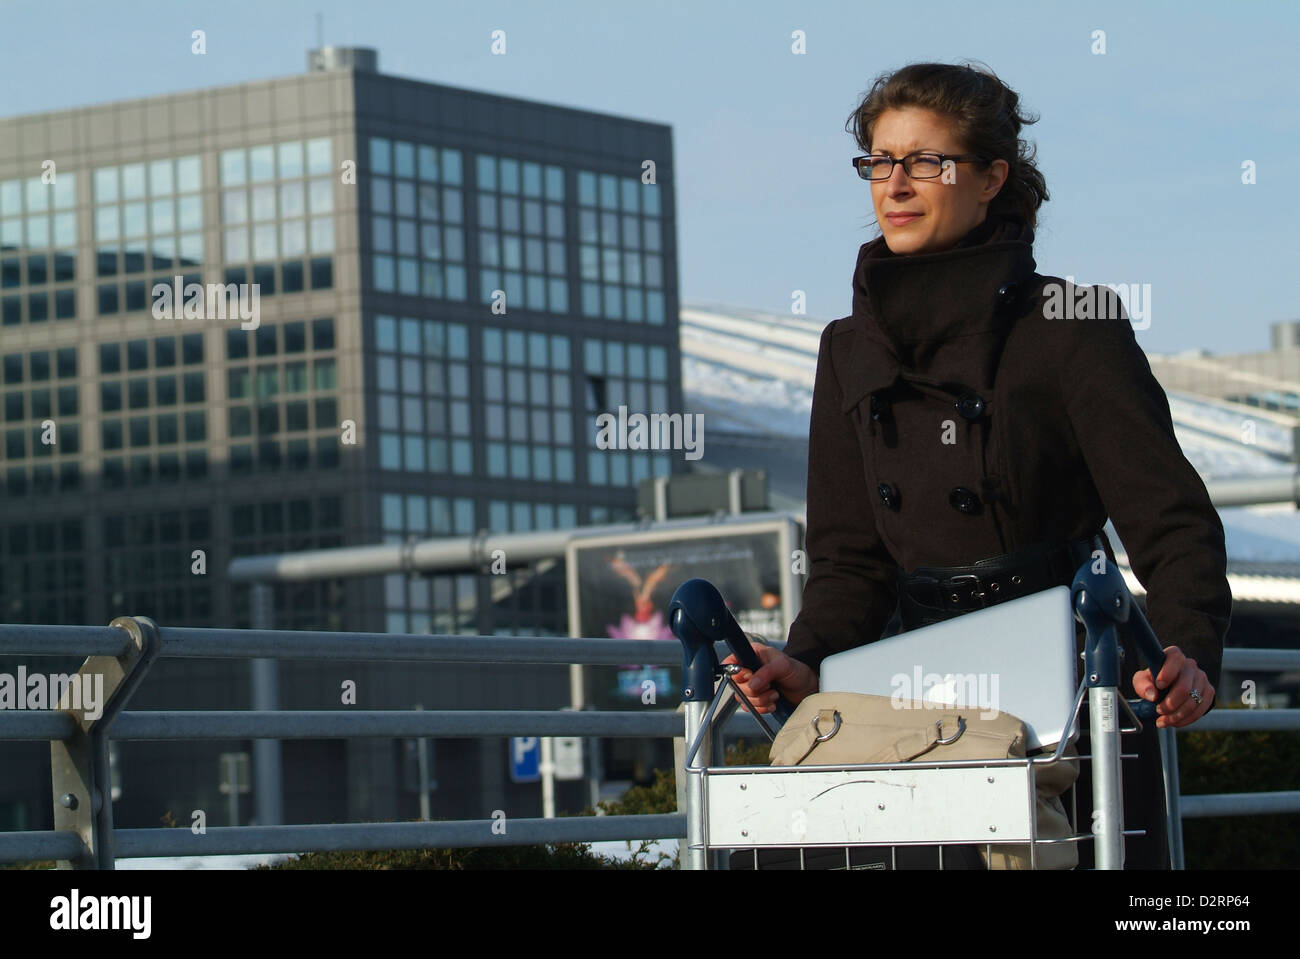 Hamburg, Germany, business woman with a Macbook Pro in trolley Stock Photo